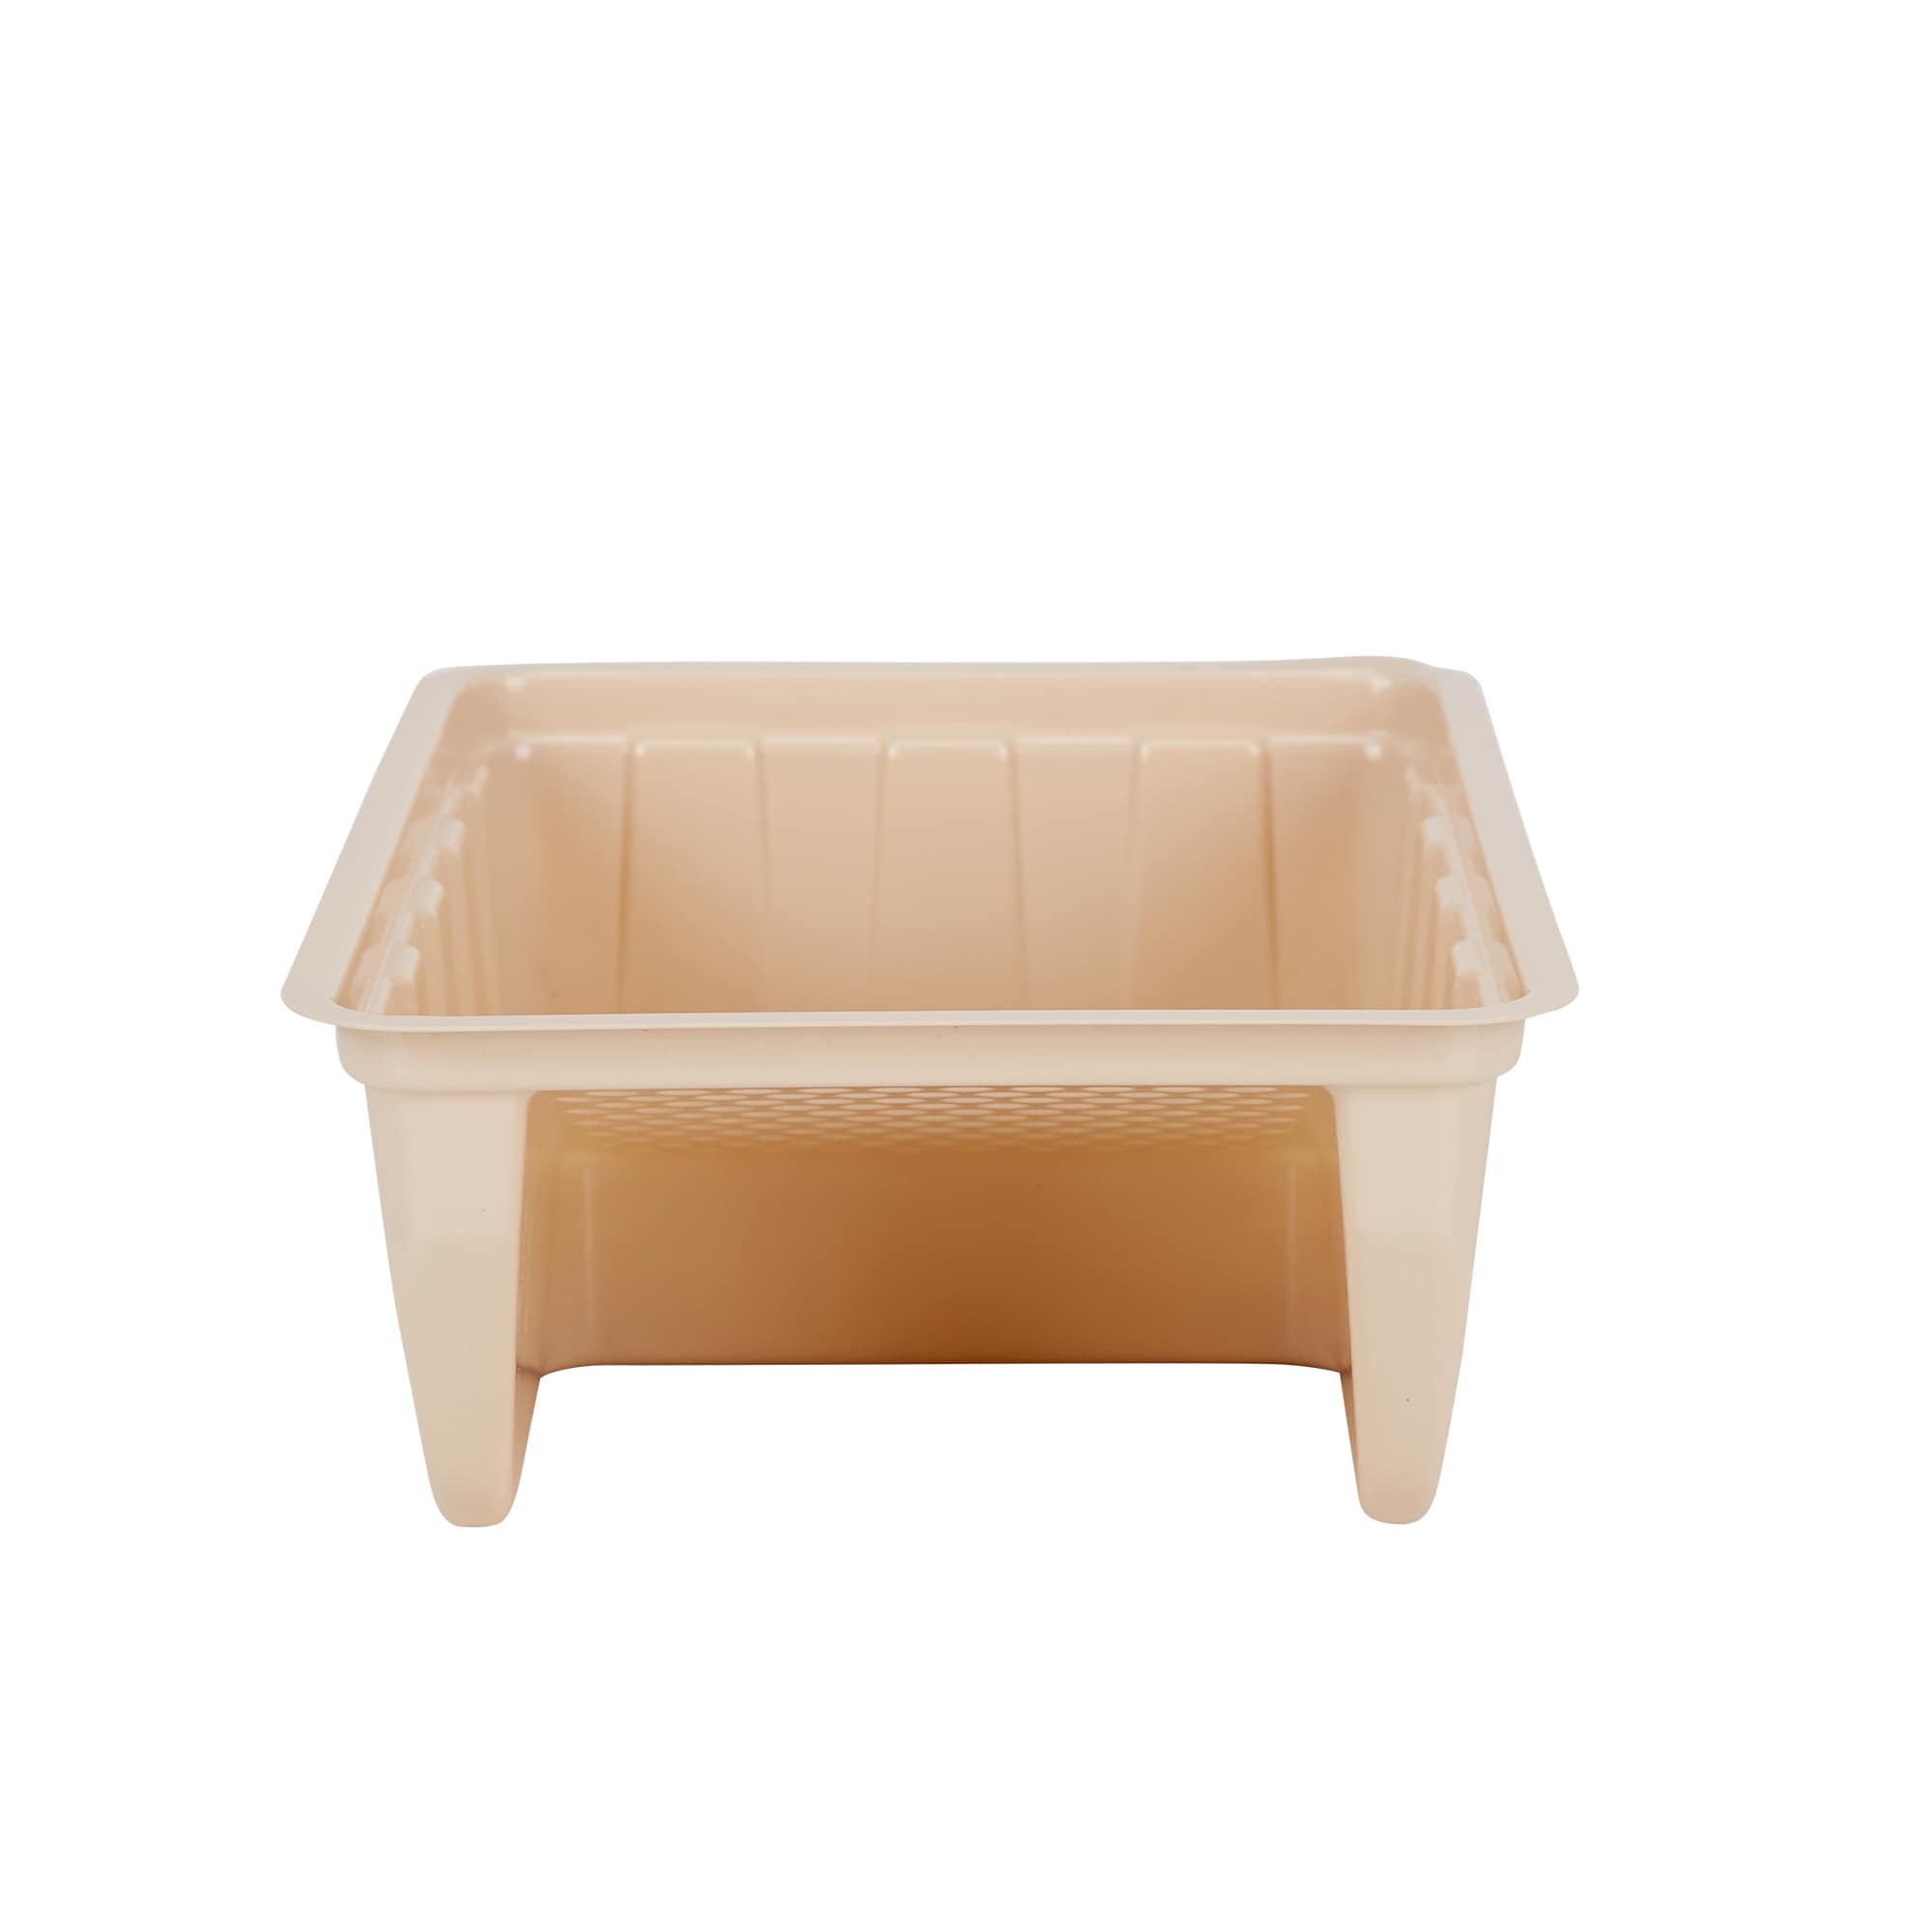 48 Wholesale Small Paint Tray - at 